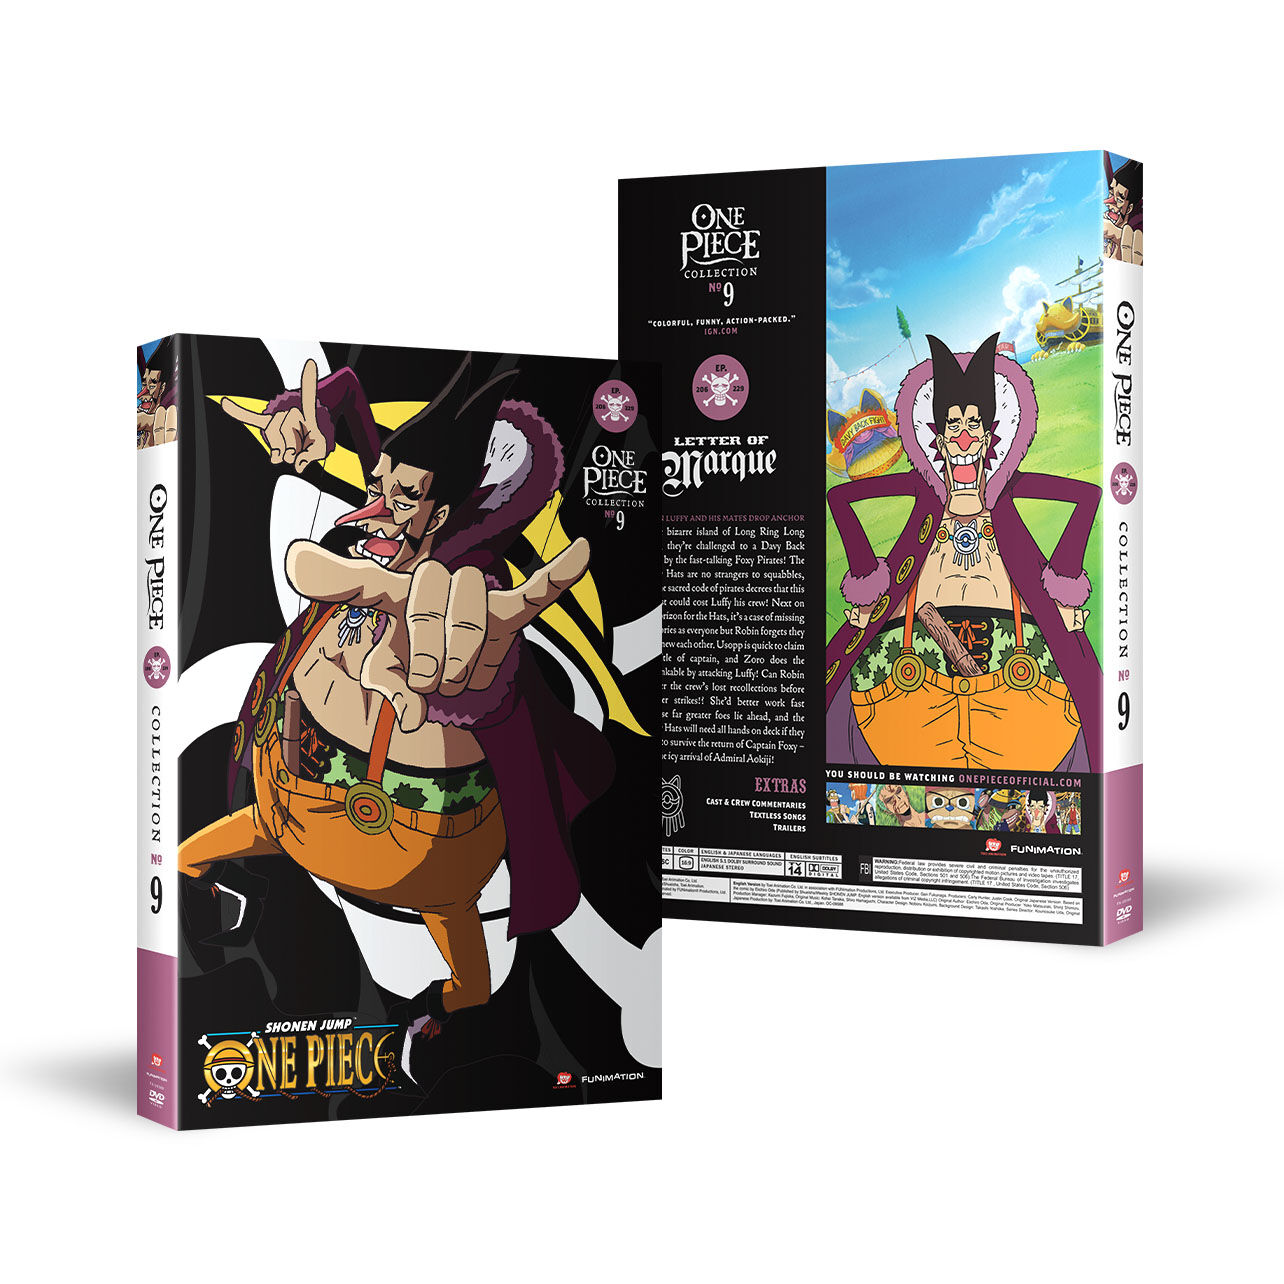 One Piece - Collection 9 - DVD | Crunchyroll Store